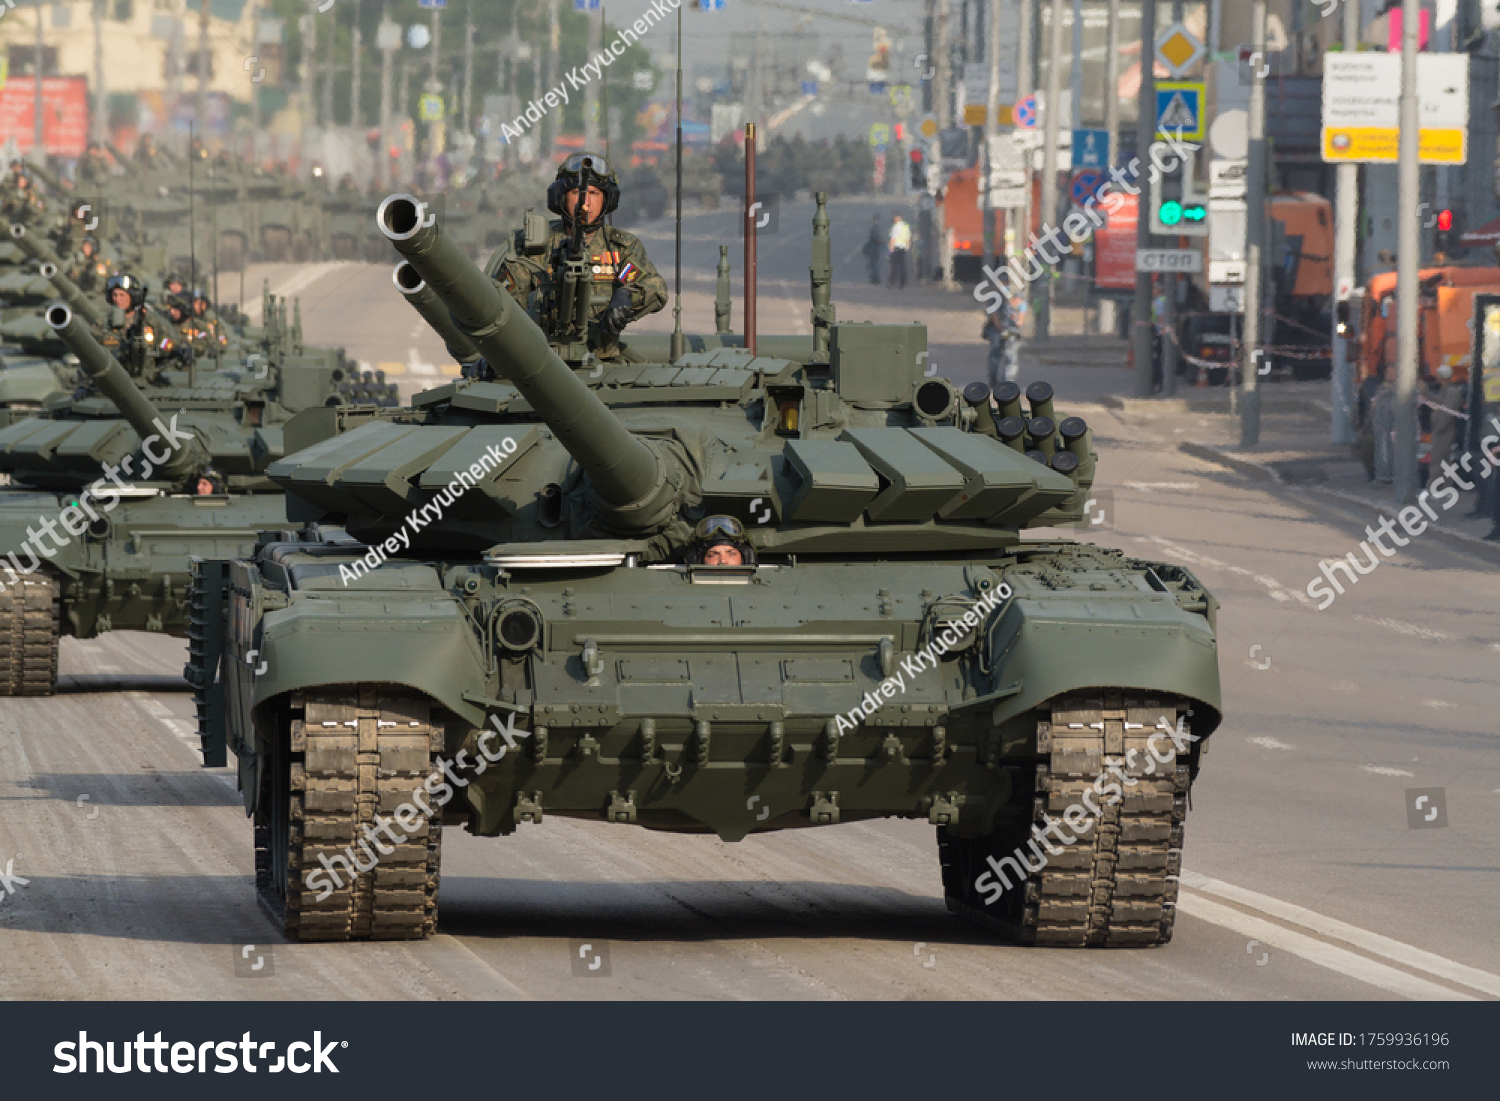 https://image.shutterstock.com/z/stock-photo-june-moscow-russia-column-of-t-b-mod-tanks-follows-to-the-red-square-to-1759936196.jpg